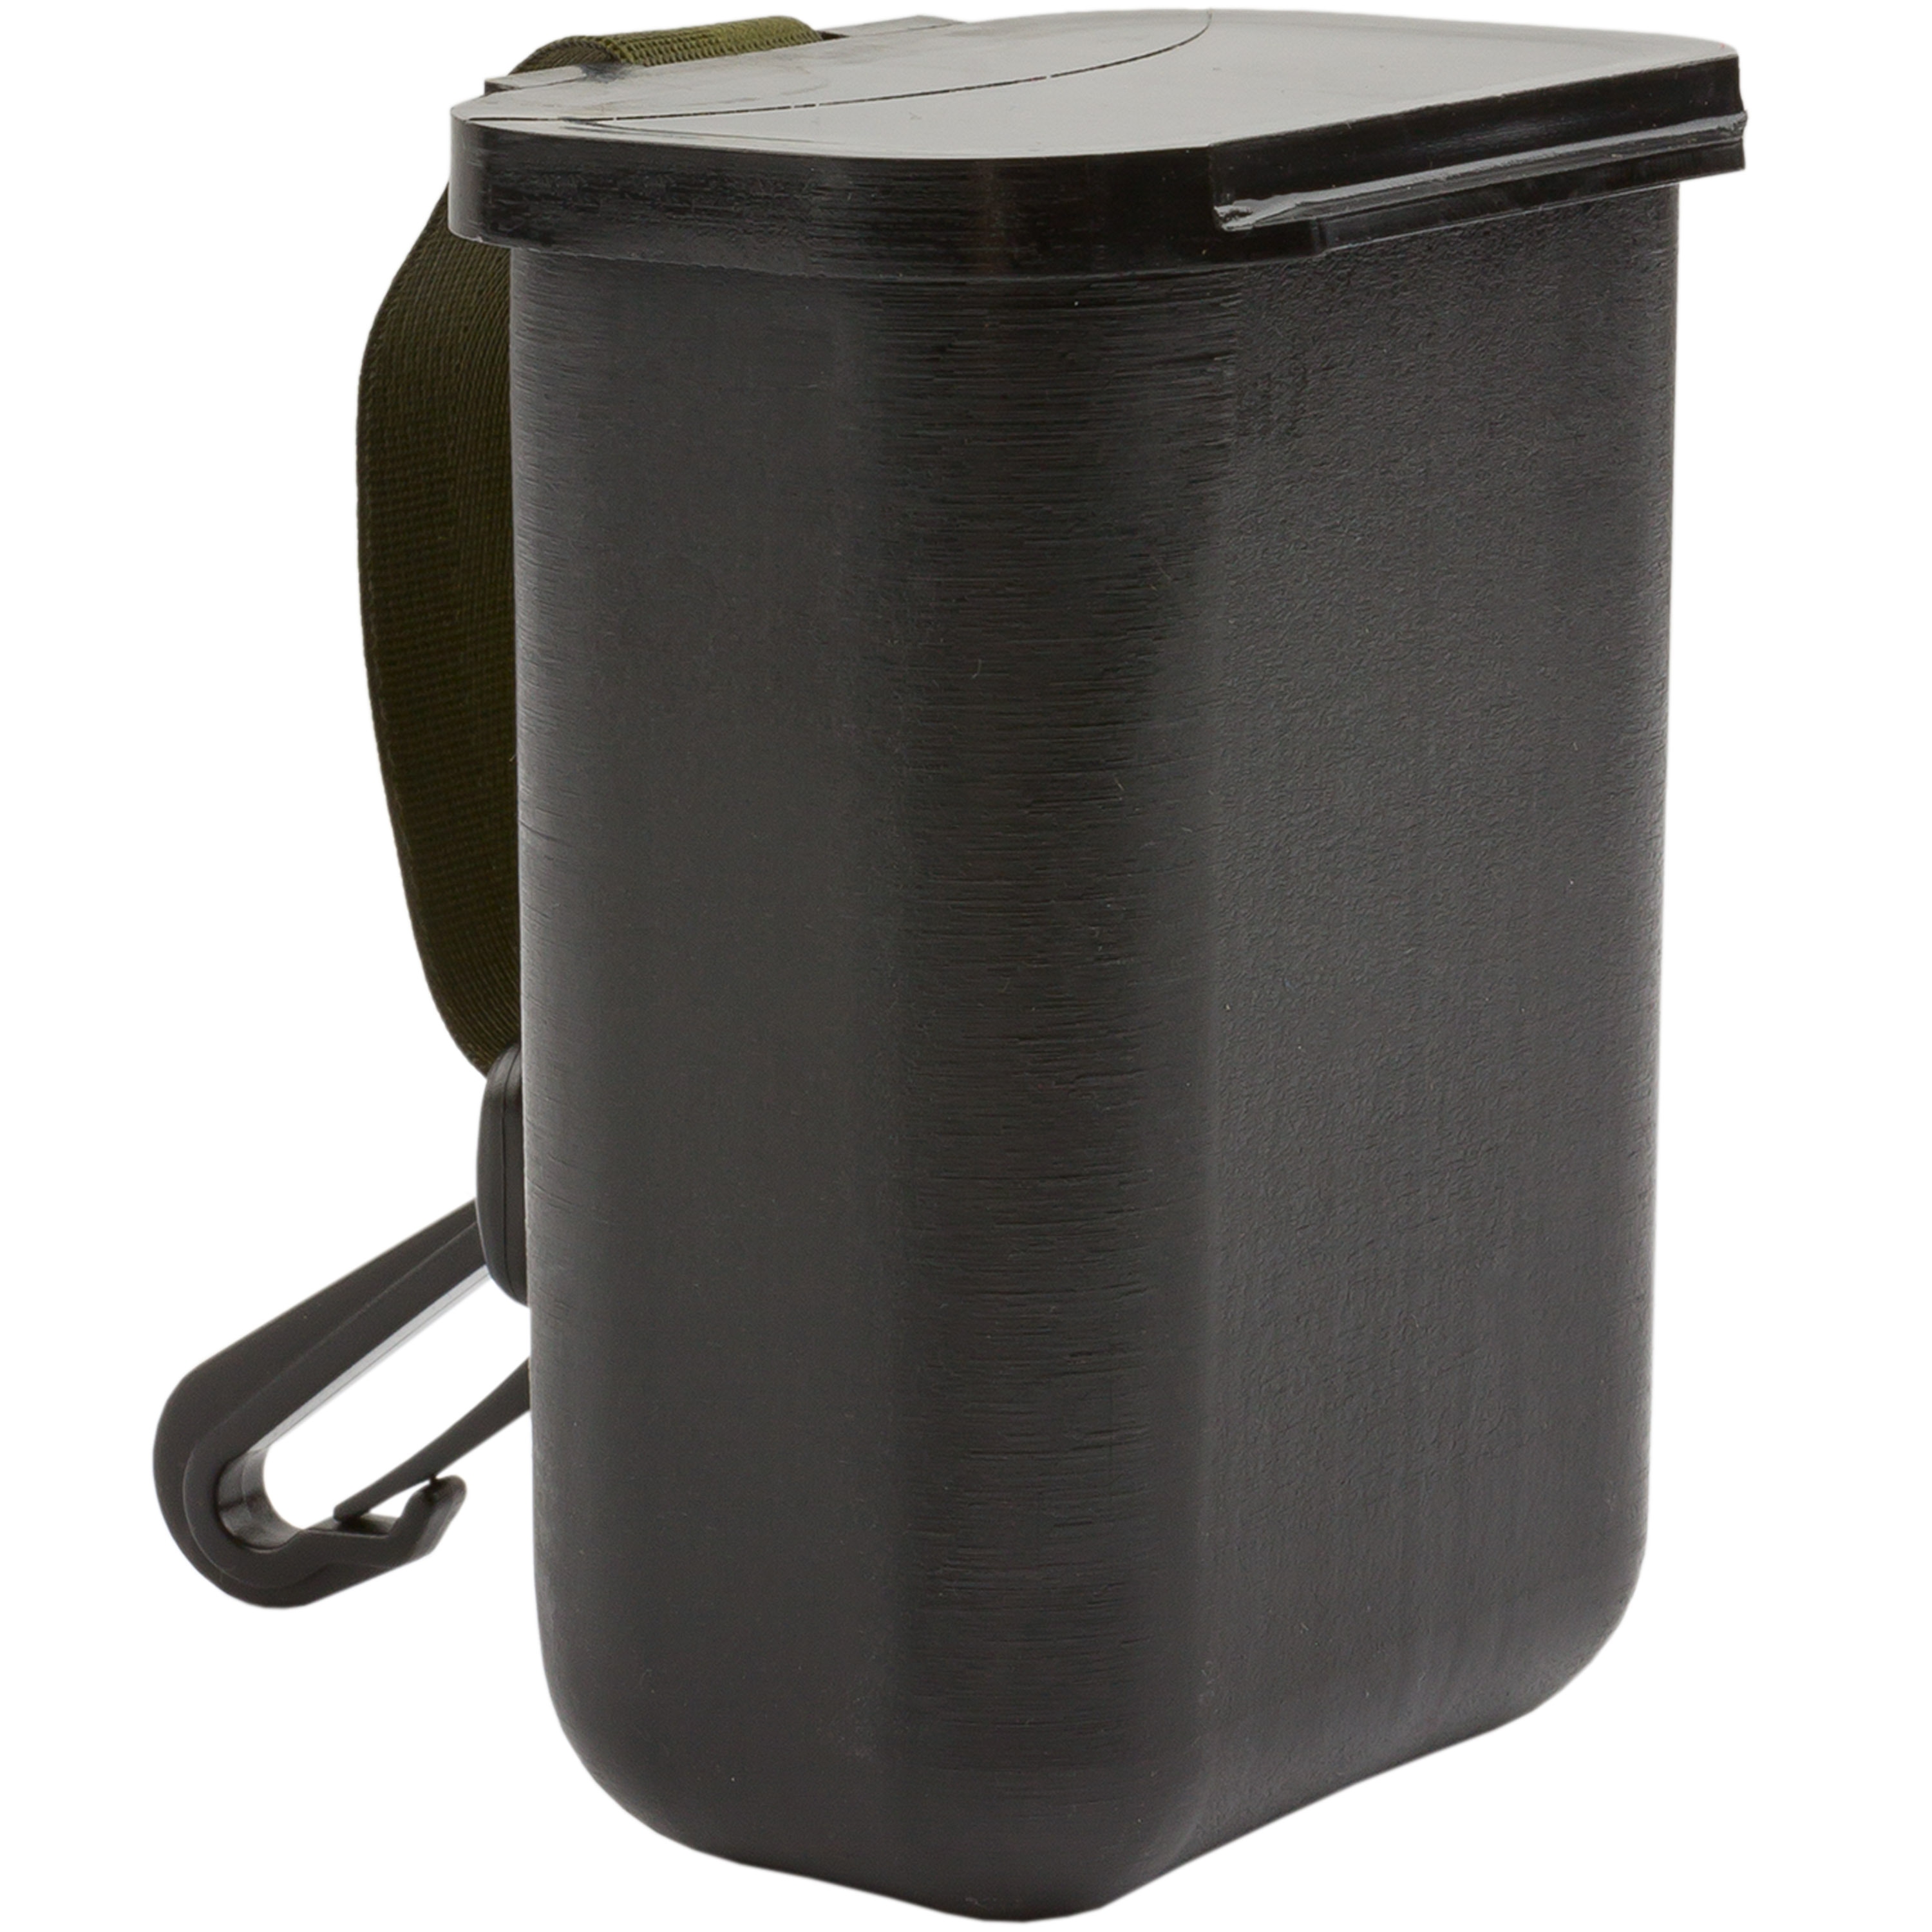 Purchase the Geocache Container black by ASMC